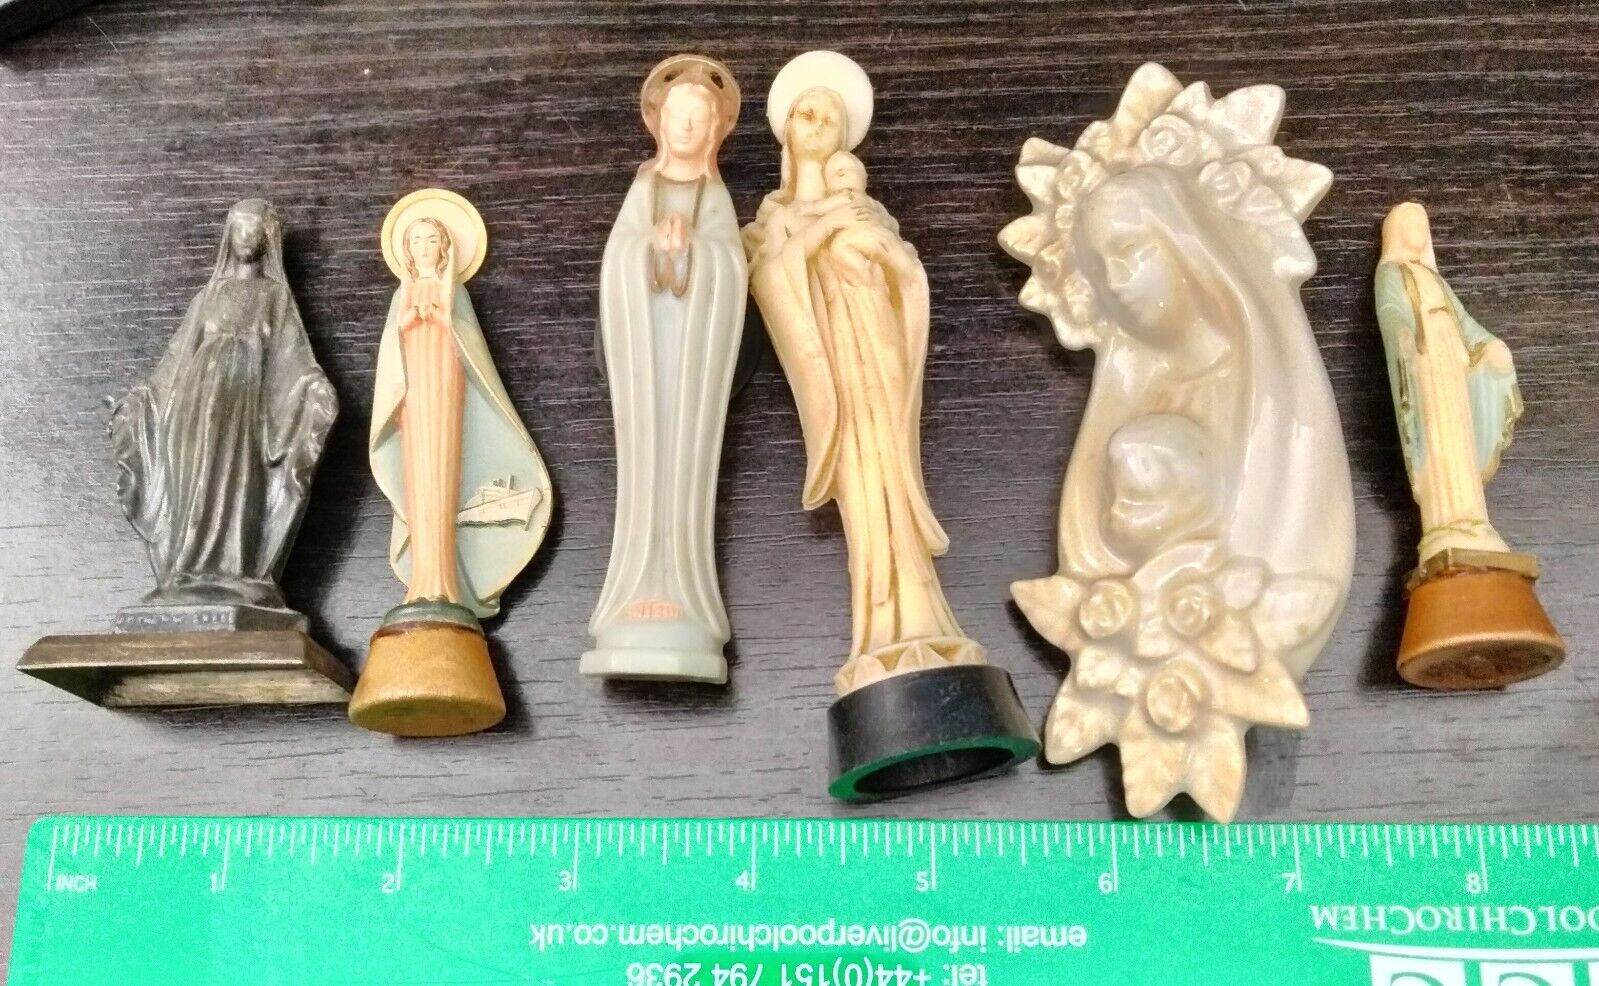 6 vintage antique Virgin Mary & Madonna with Jesus small figures figurines